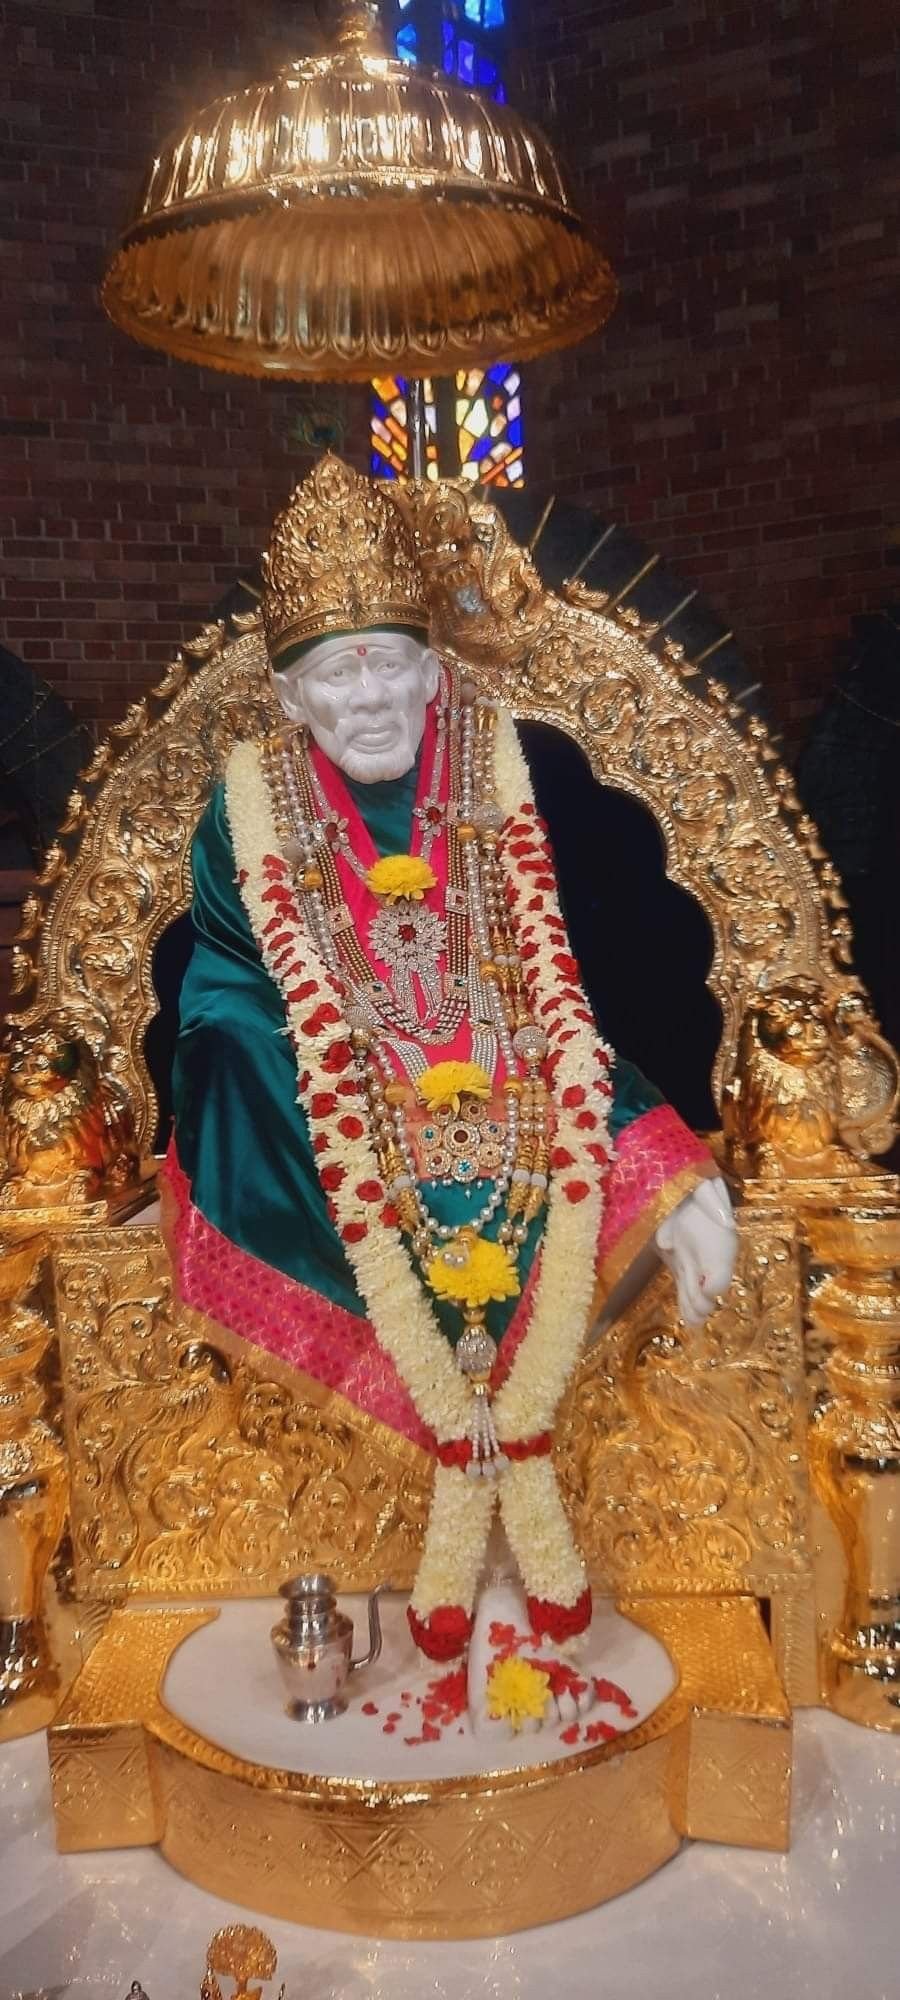 Sai Baba Images Whiite Red